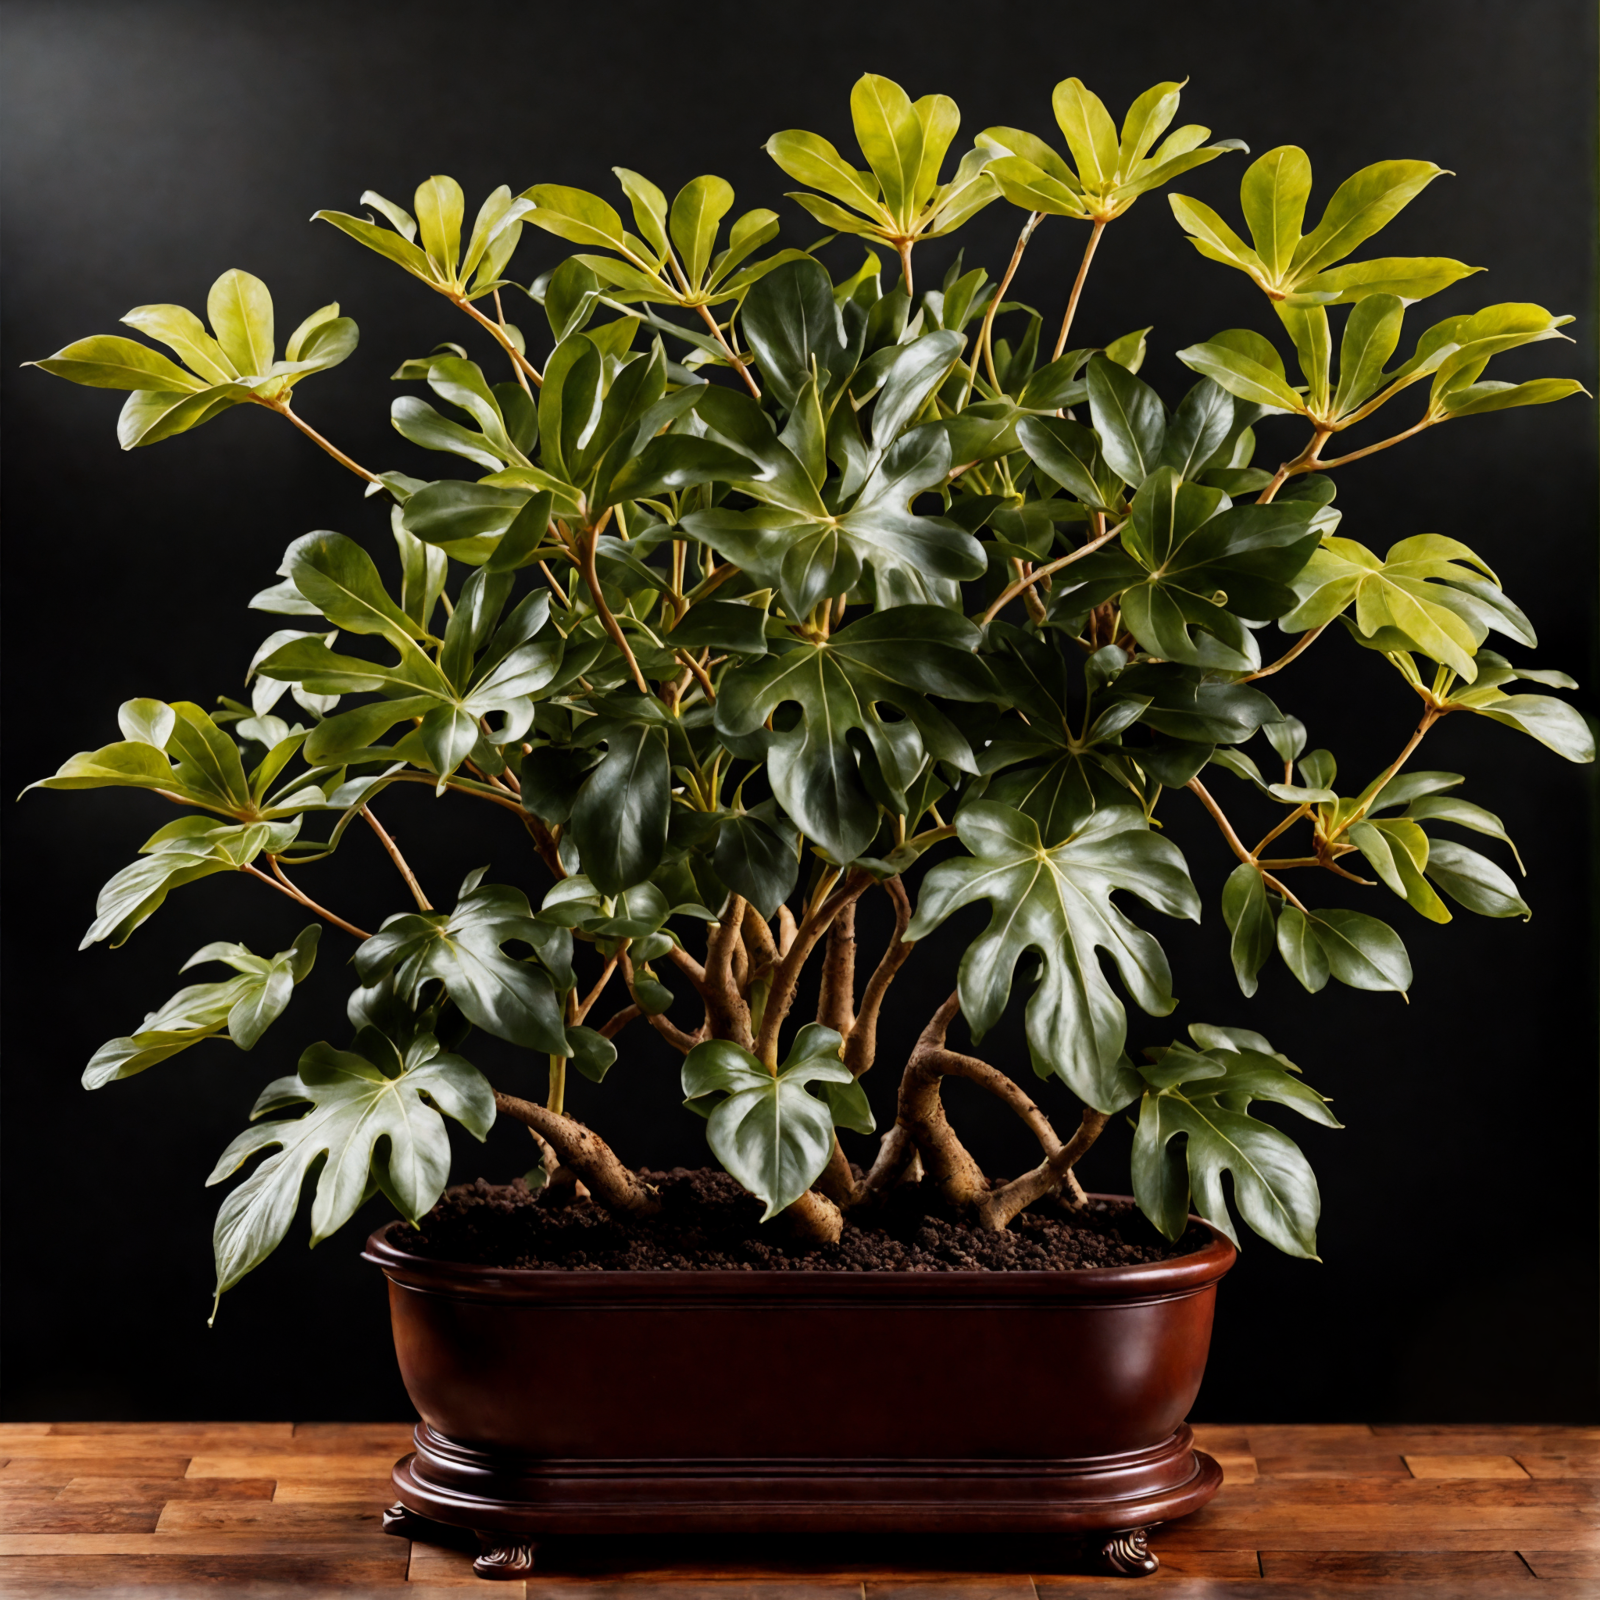 Fatsia japonica in a brown bowl on a wooden table, with clear lighting and a dark background.